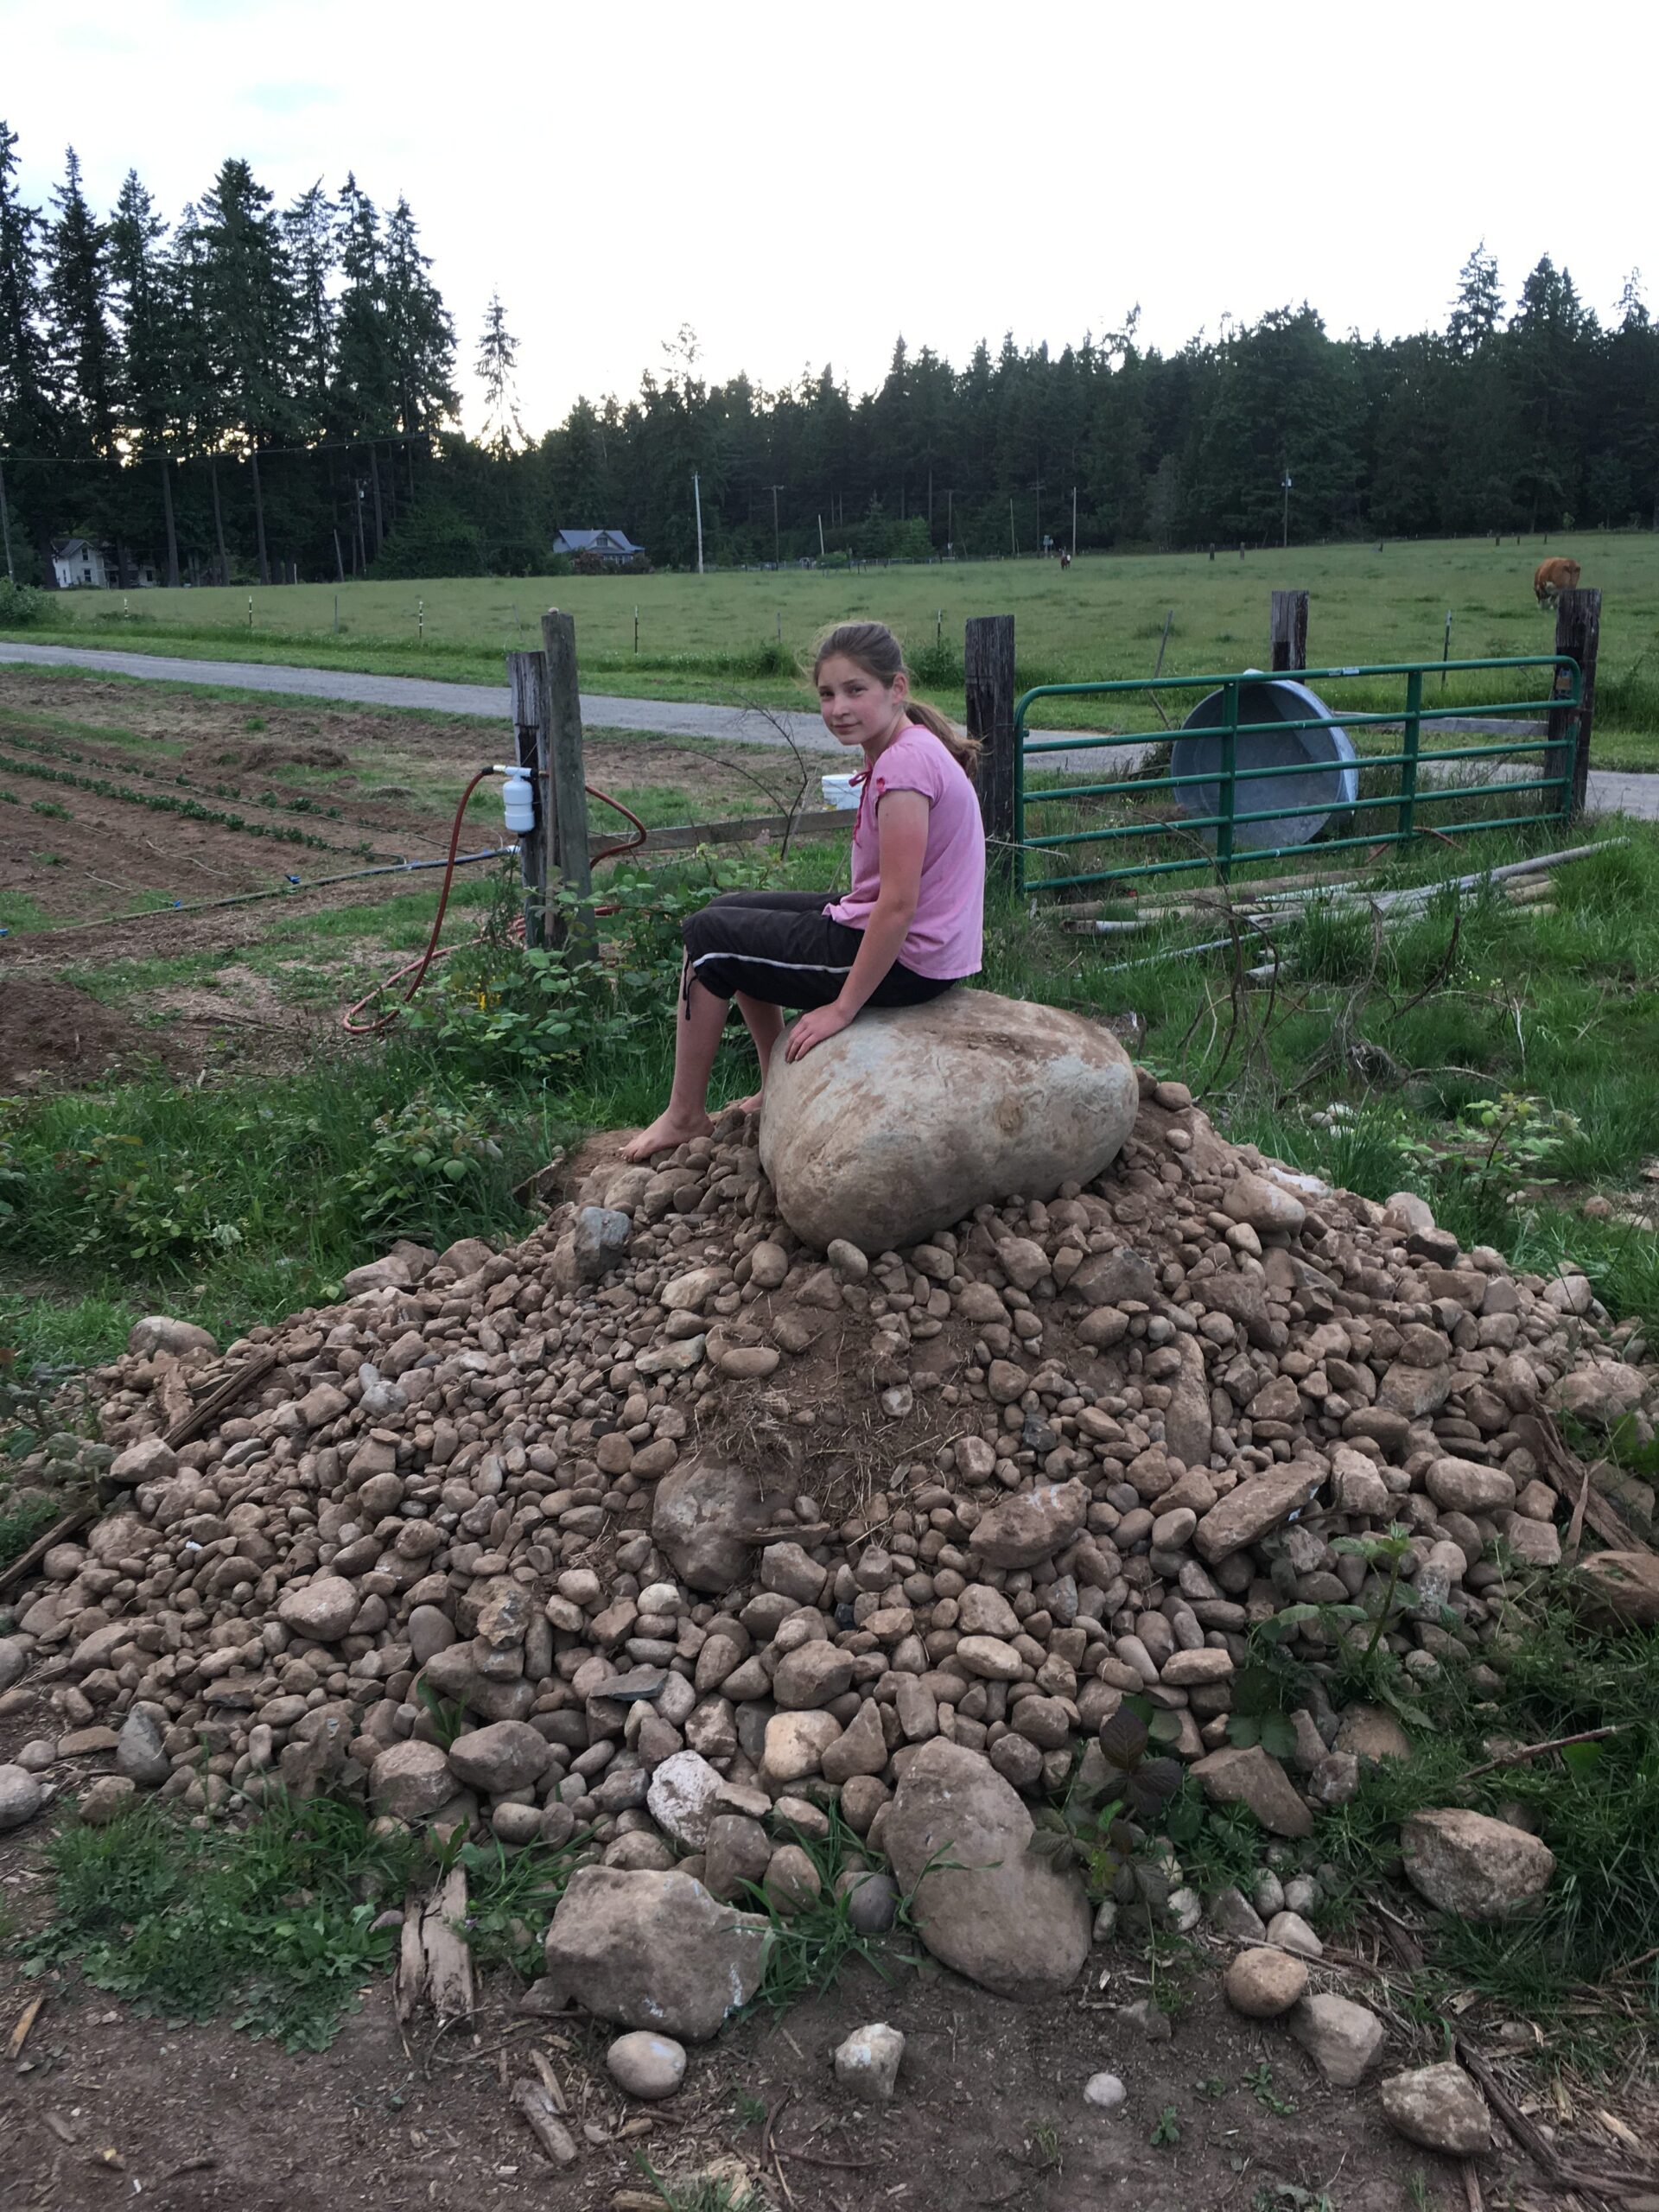 this pile of rocks was picked as we worked the soil this season